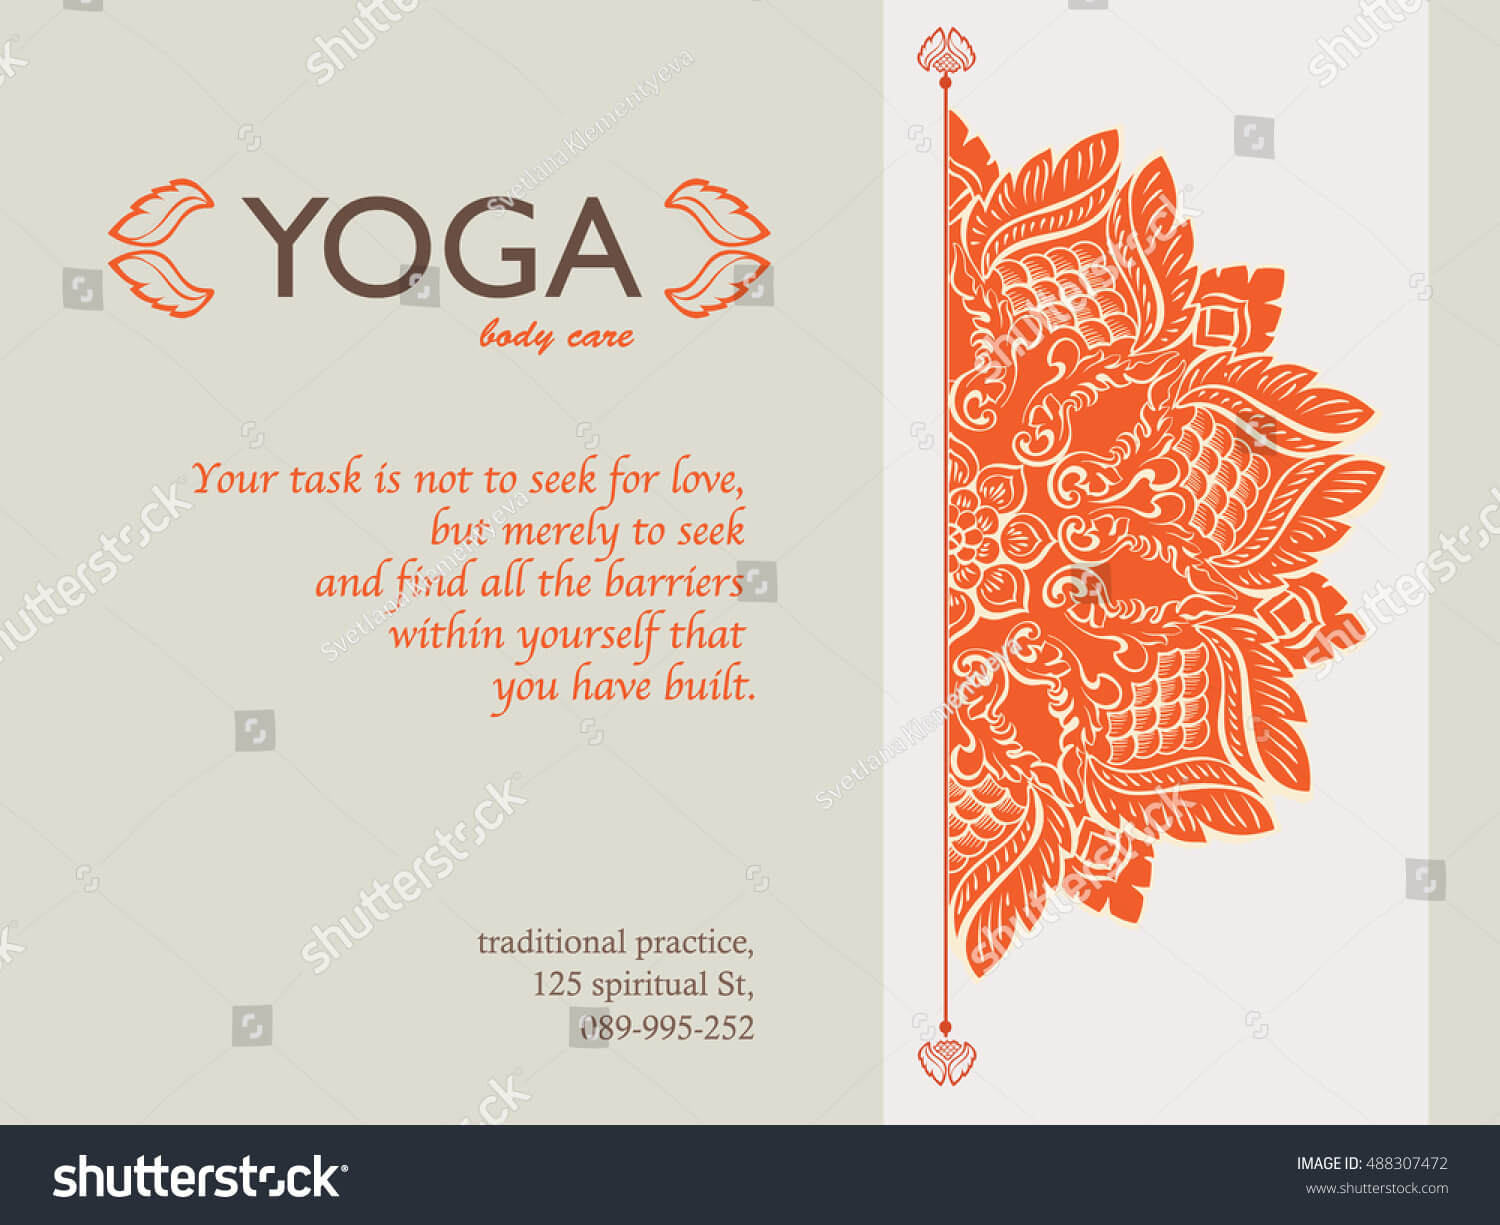 Yoga Gift Certificate Templates | Gift Certificate Templates Throughout Yoga Gift Certificate Template Free